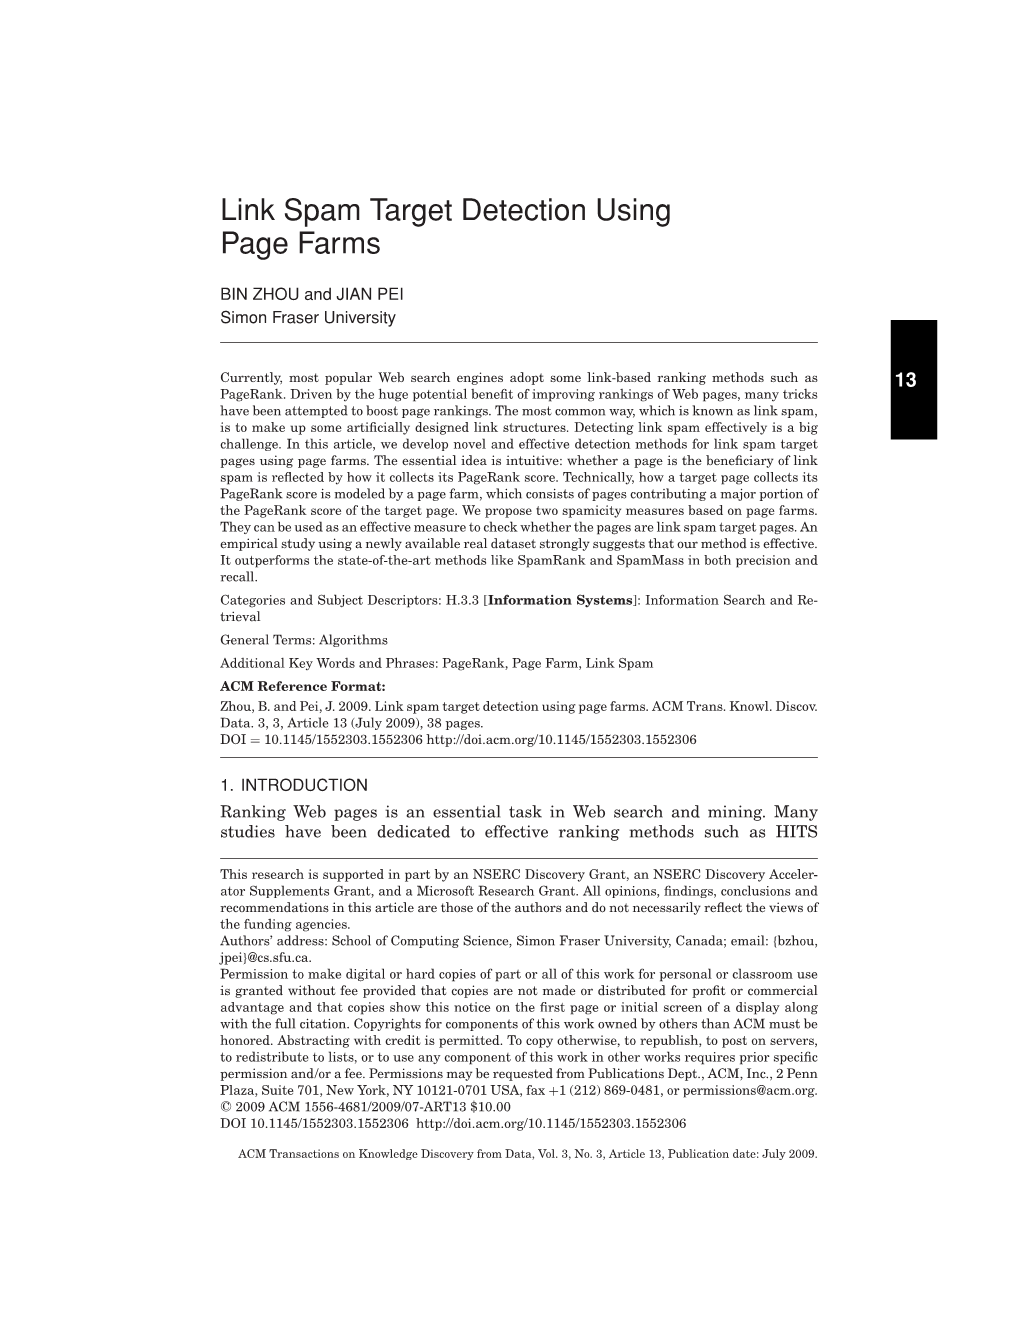 Link Spam Target Detection Using Page Farms